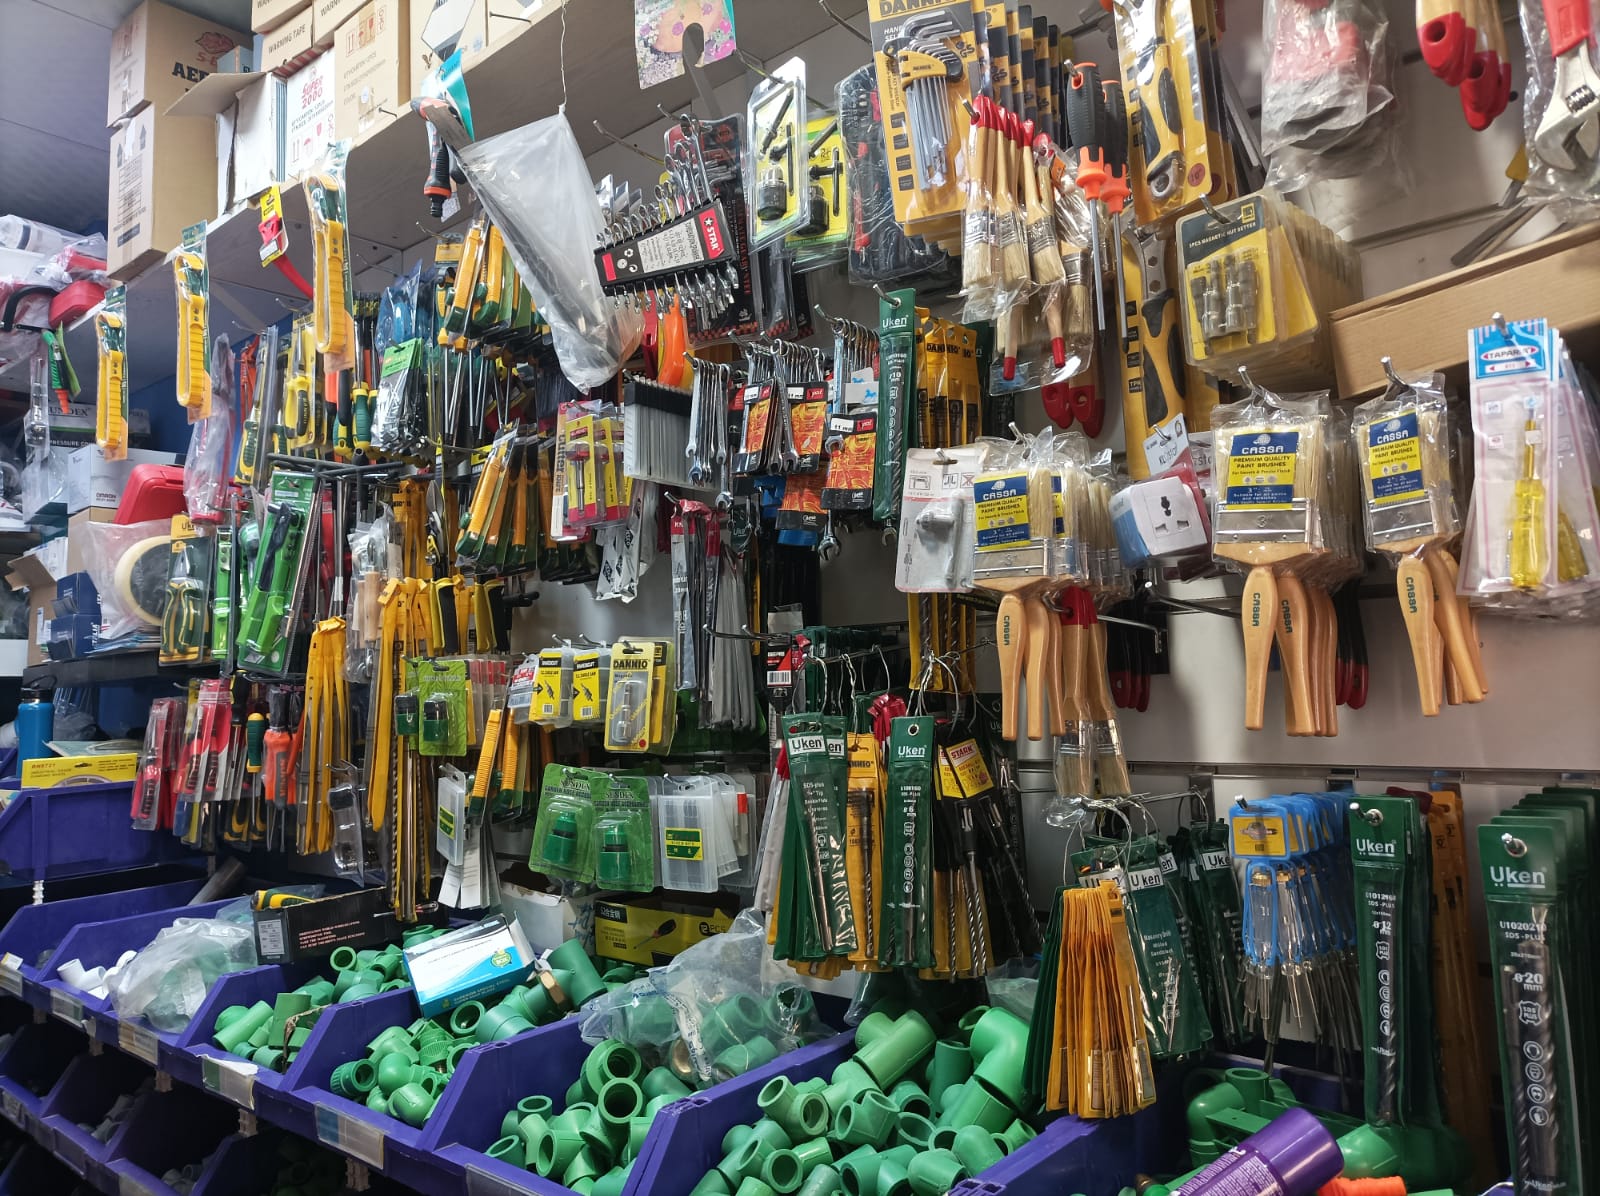 Where to Find Good-Quality Hardware and Tools in Dubai